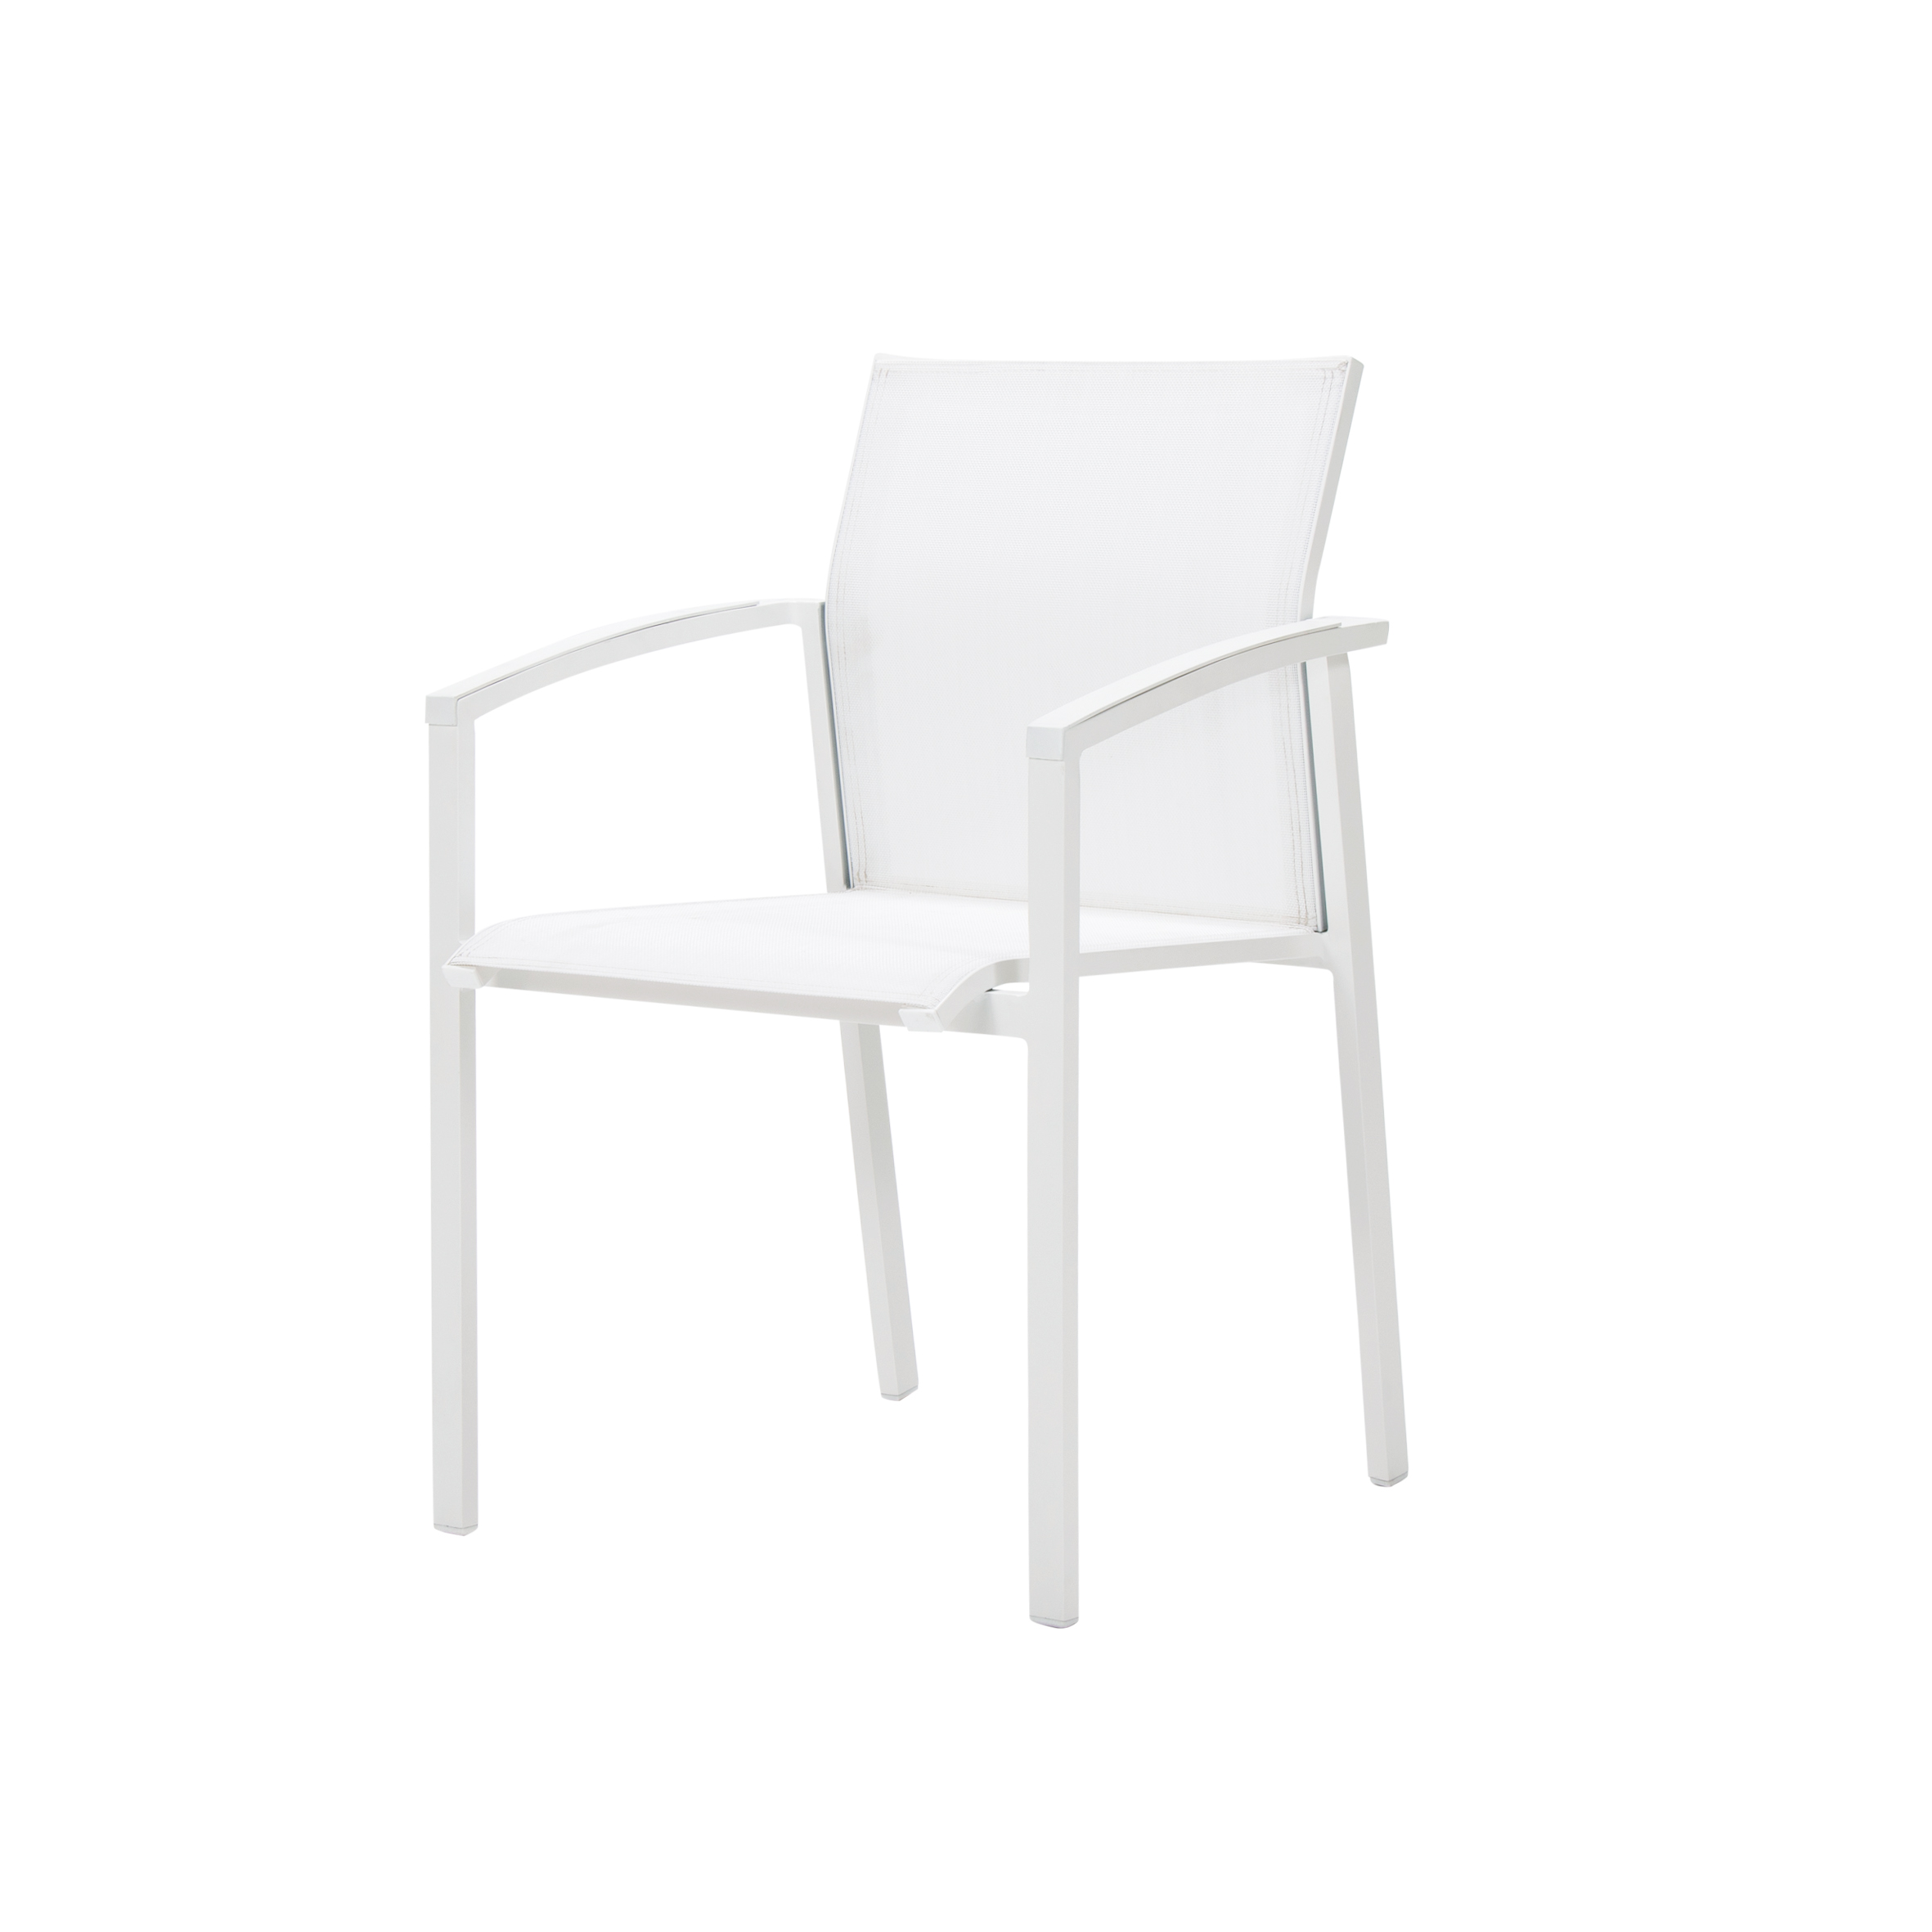 Kotka textile dining chair S1